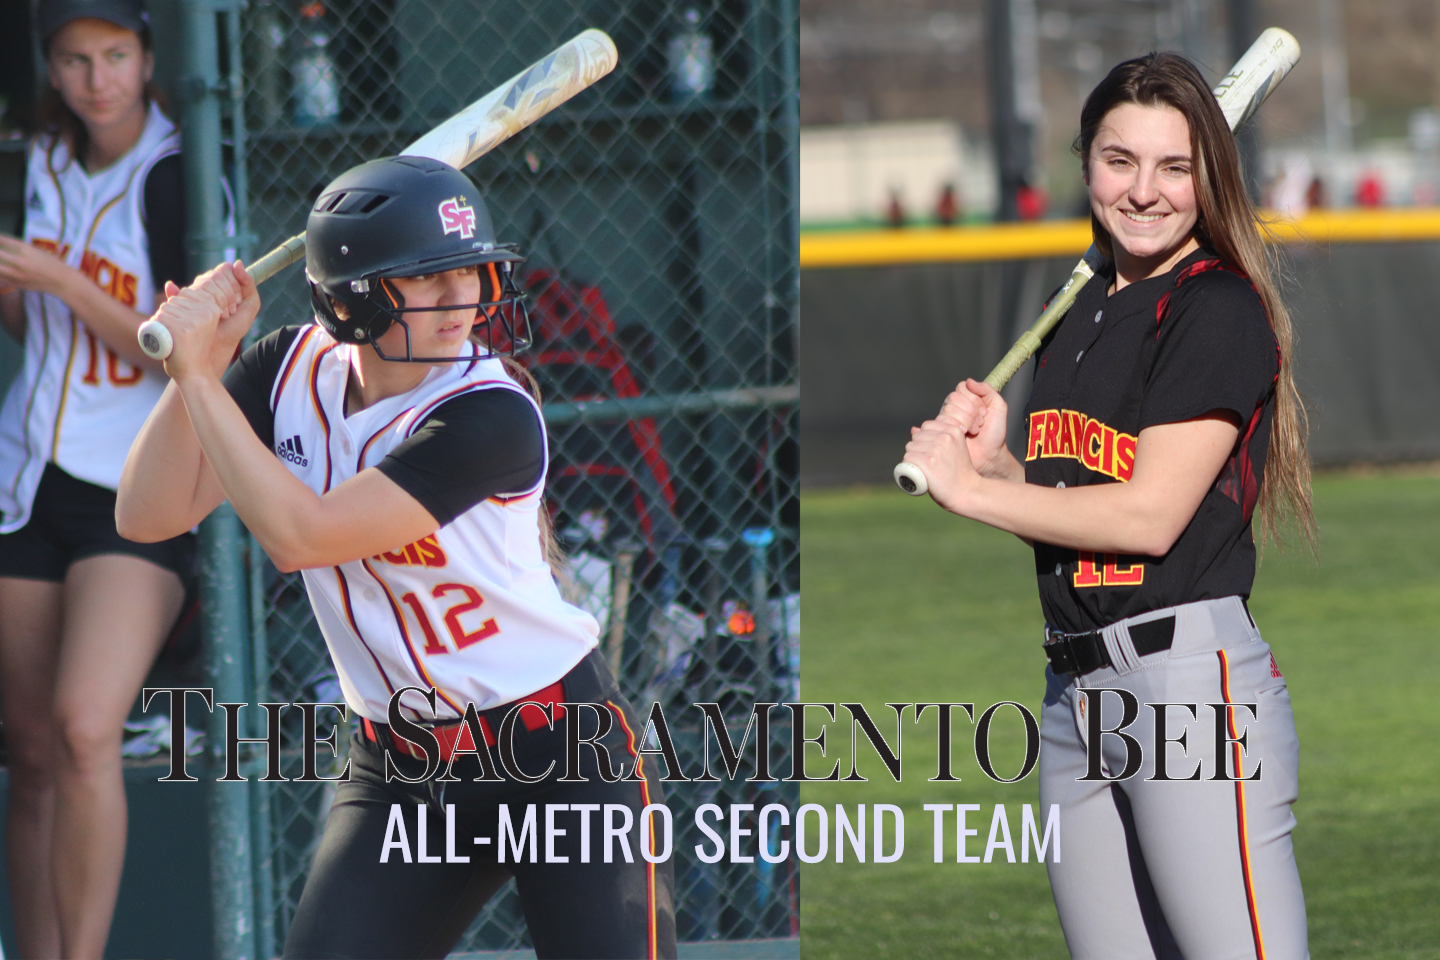 Softball’s Smith Named to SacBee All-Metro Second Team